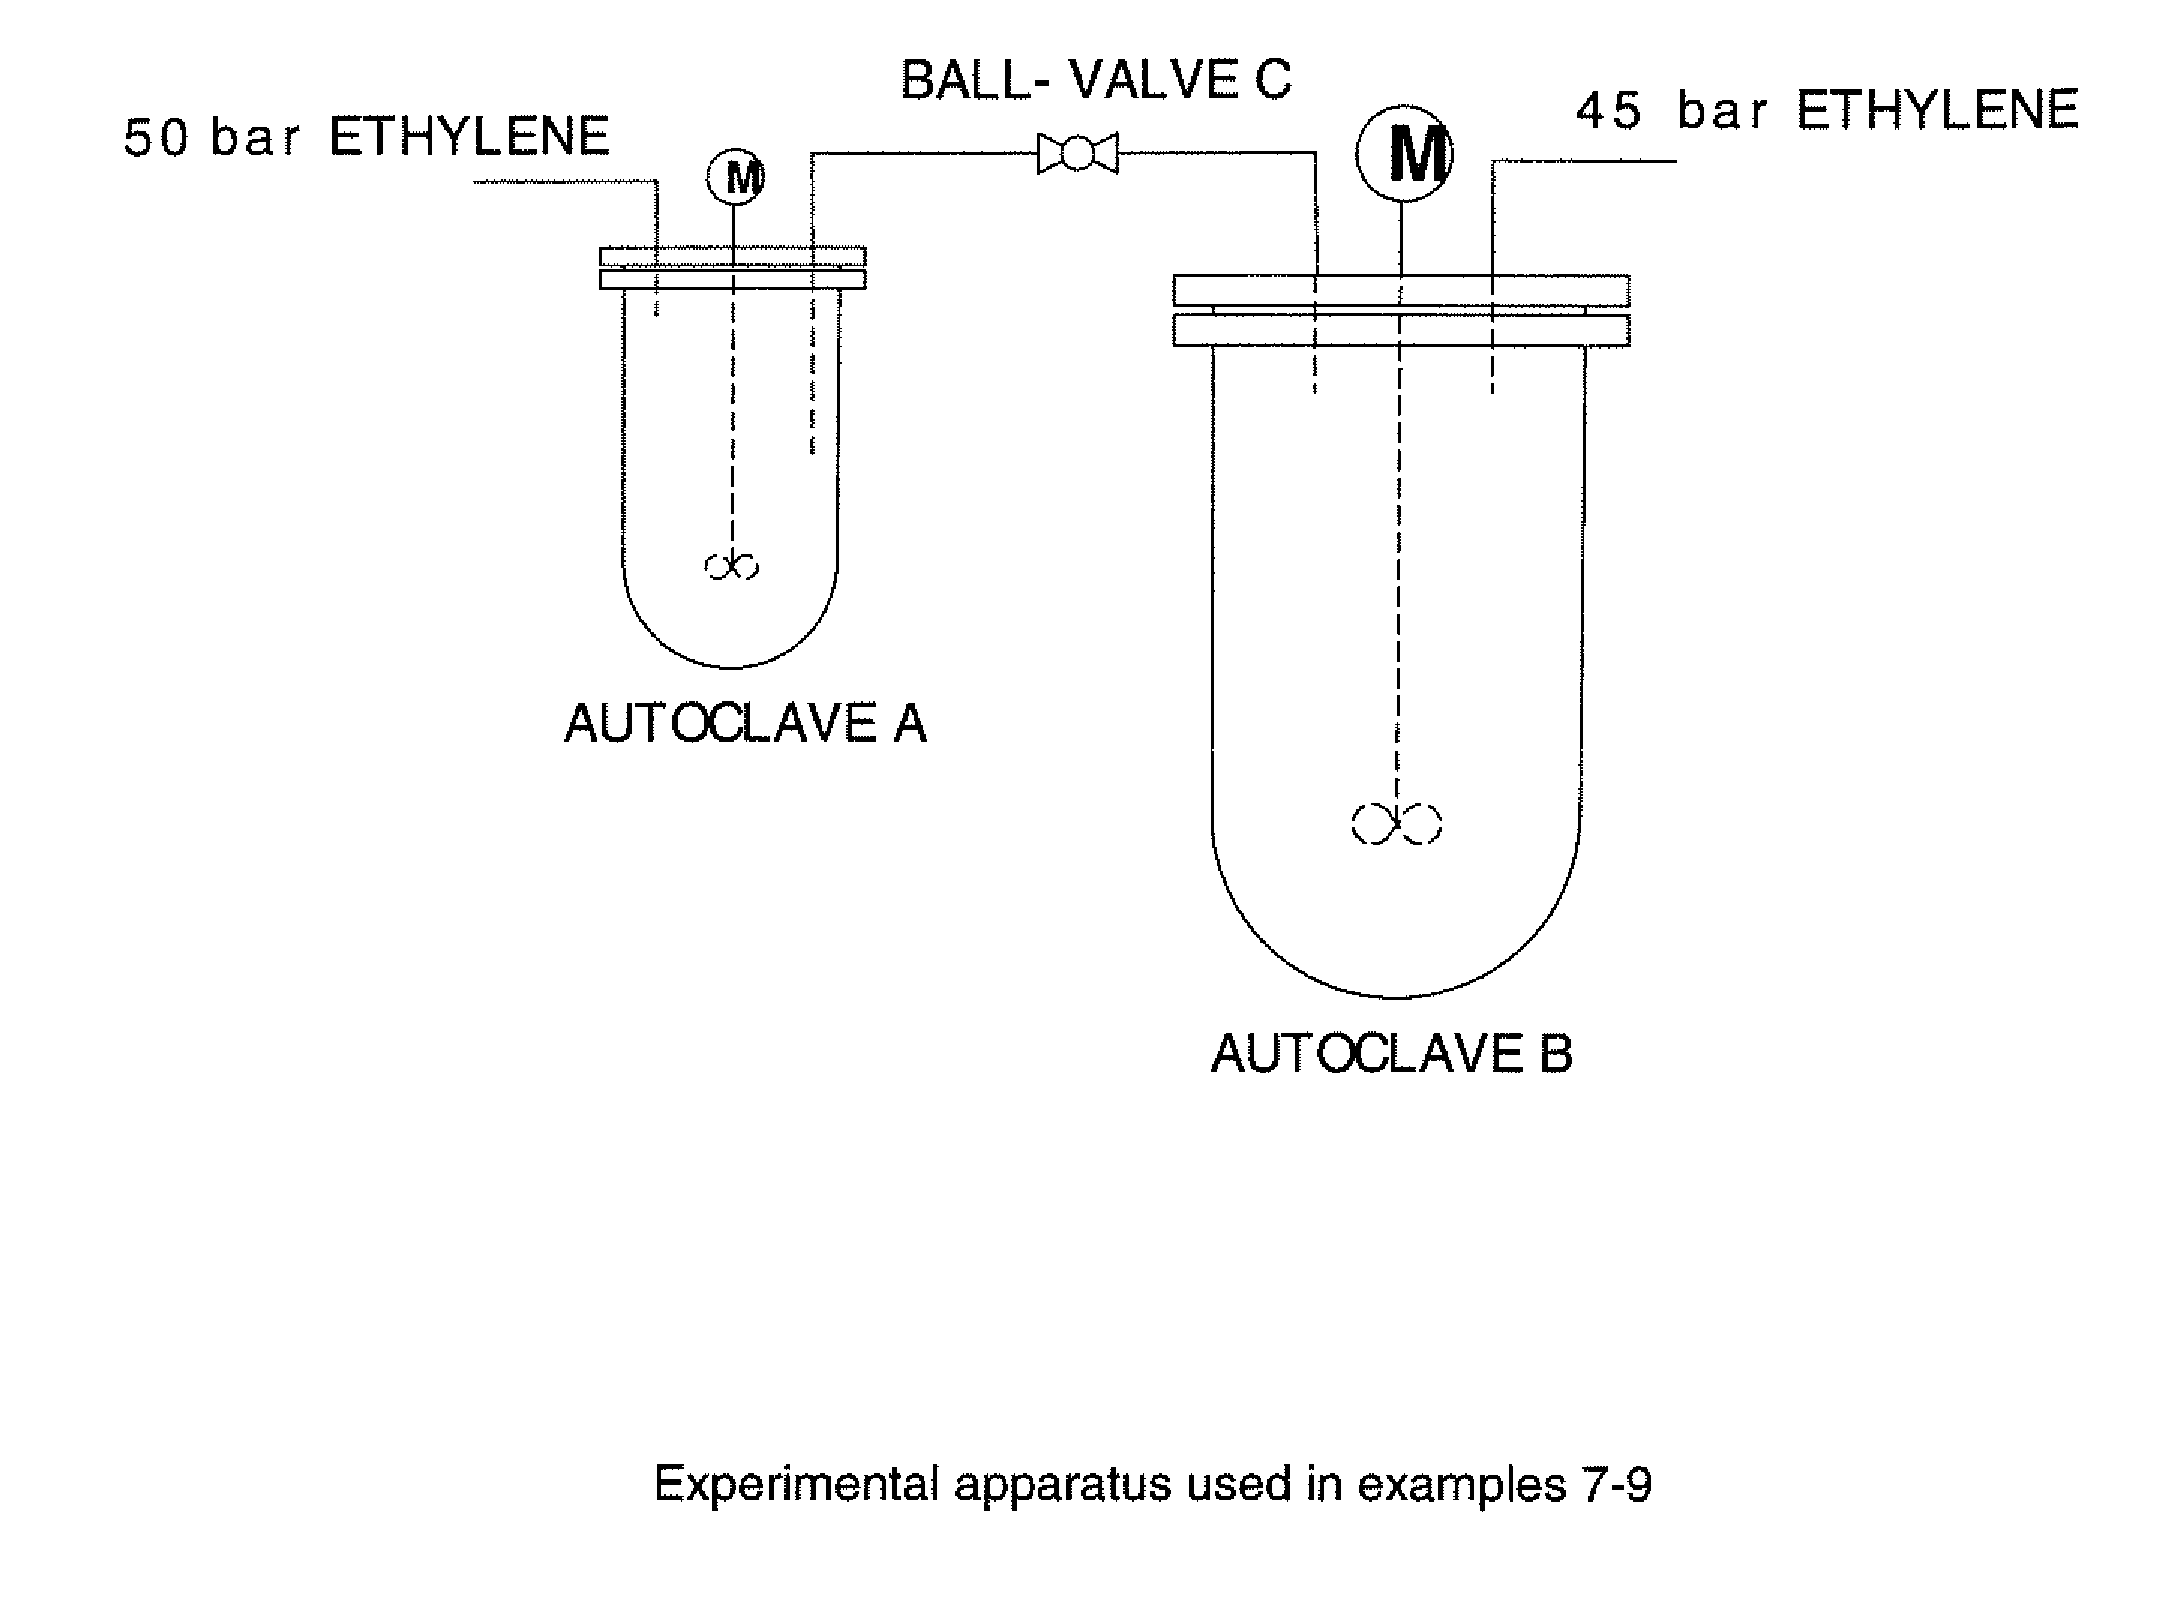 Oligomerisation of olefinic compounds in the presence of a diluted metal containing activator